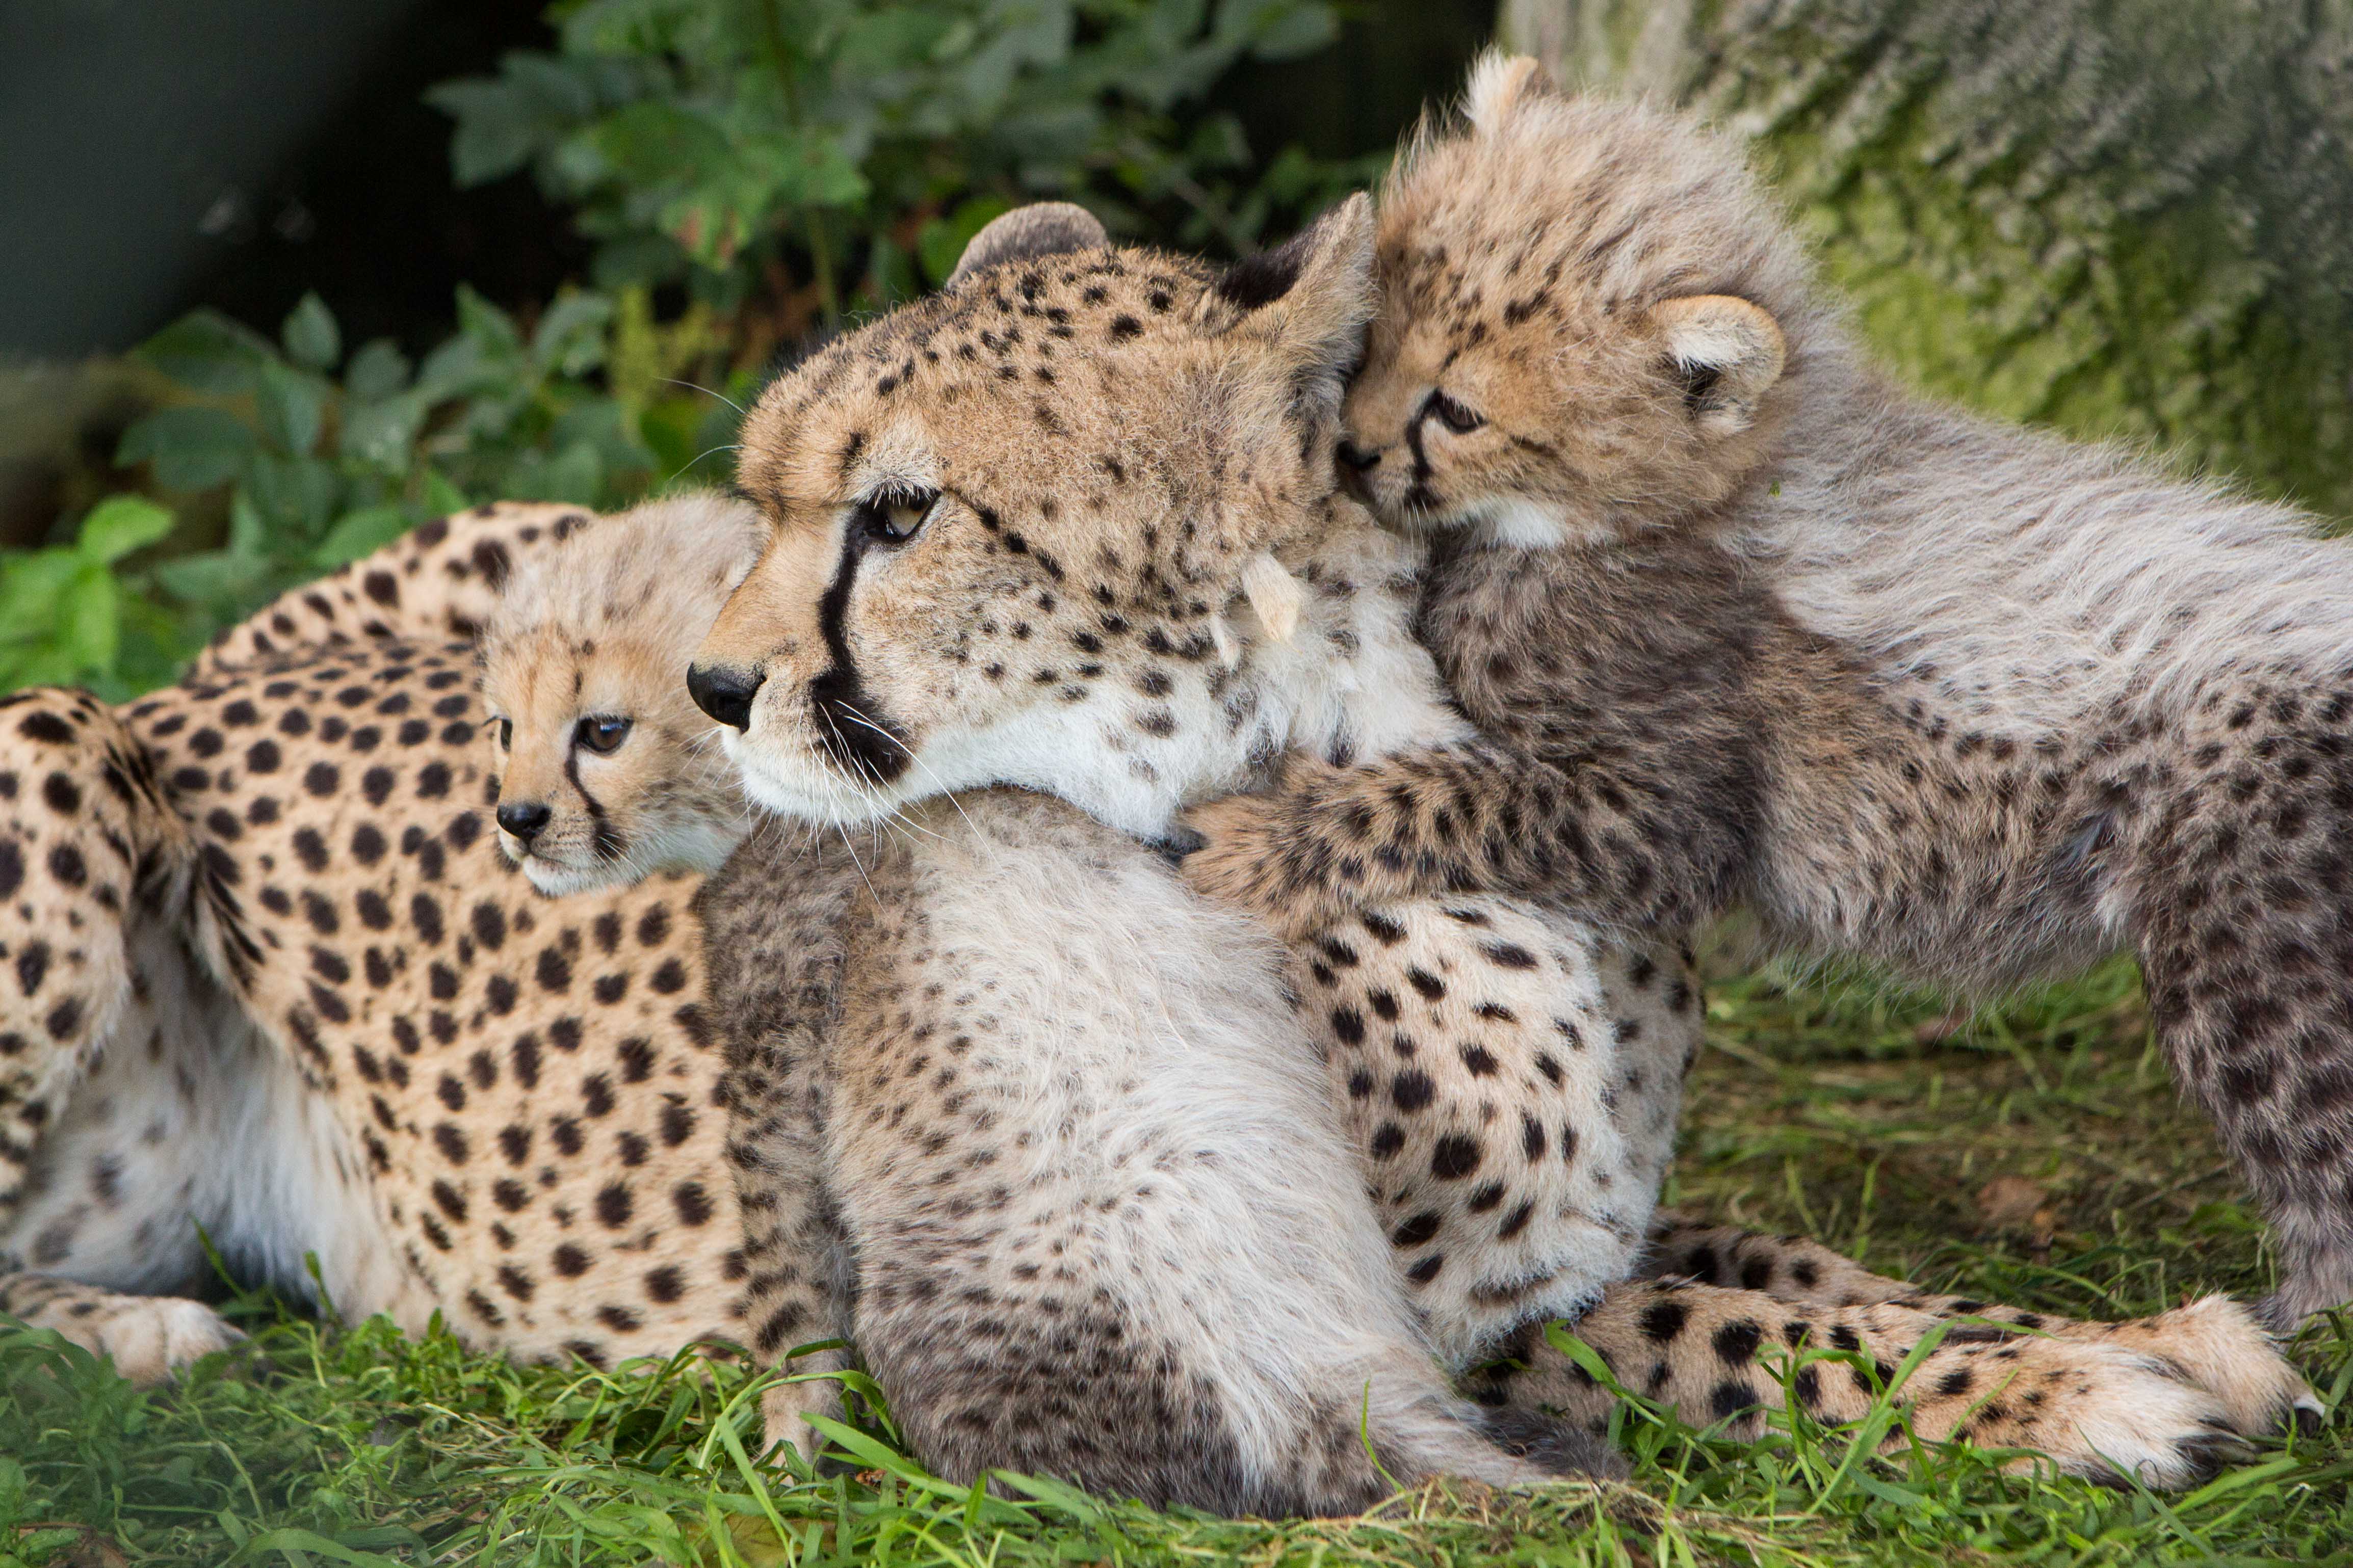 Say Hello to our Cheetah Cubs